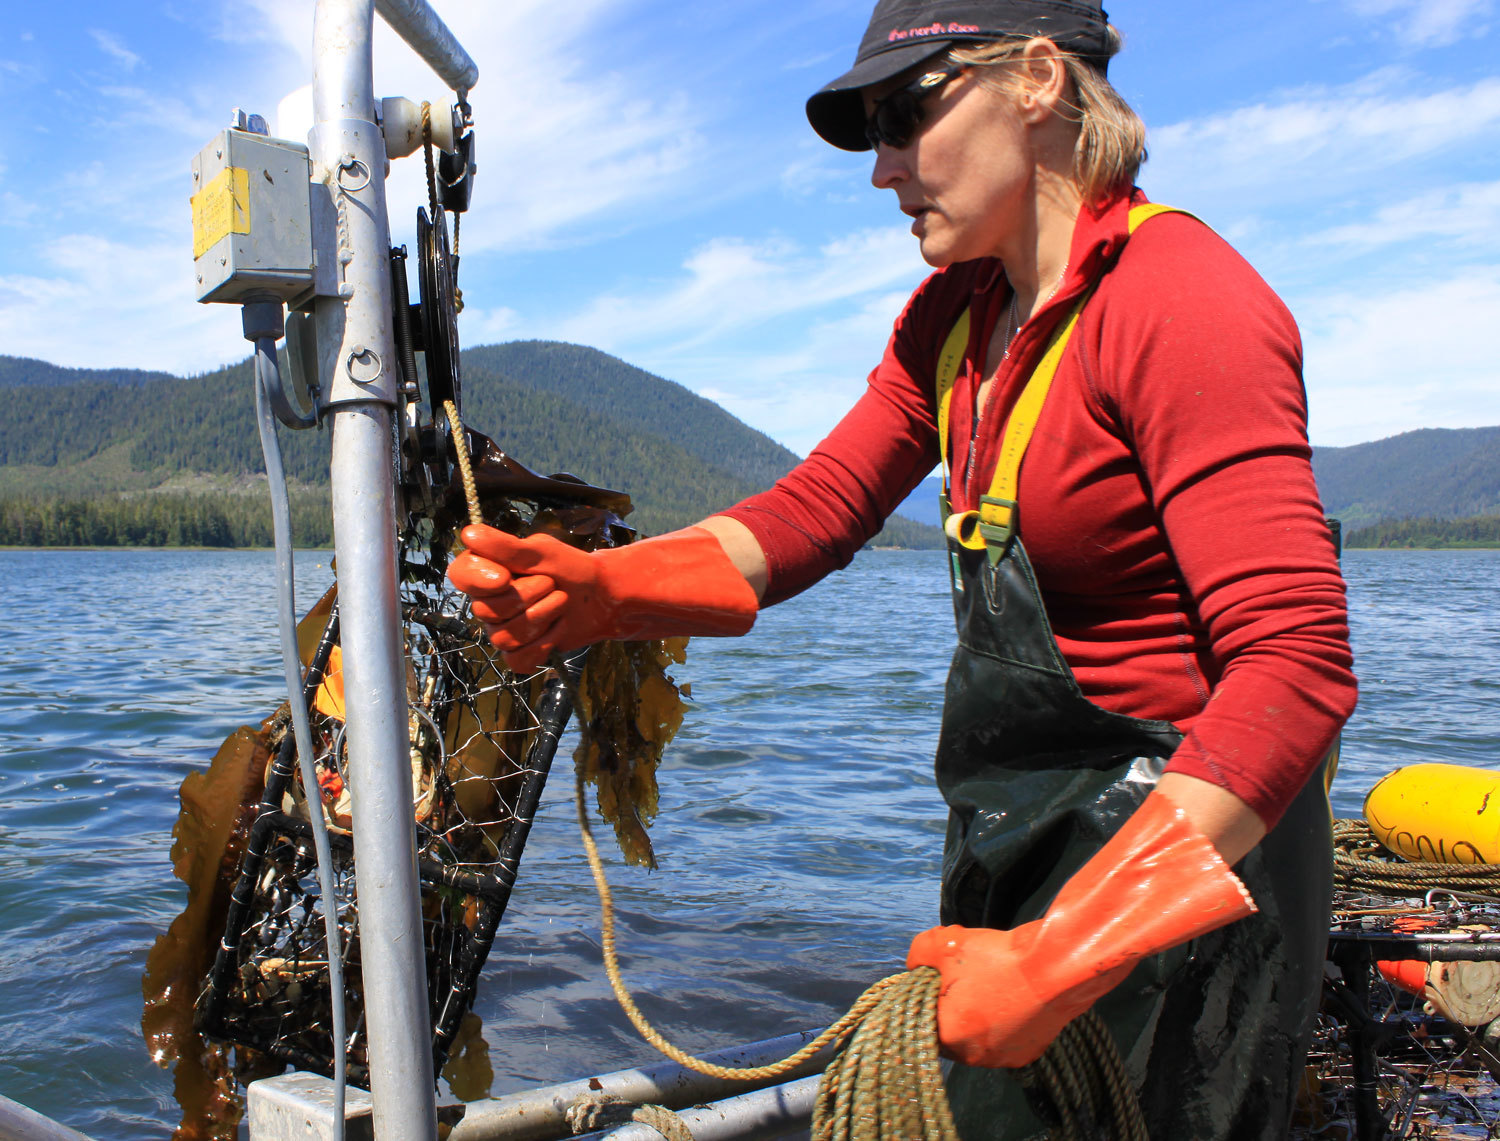 Dungeness crab pot coming up with lots of kelp and some crab. Cindy coils the line carefully so that the pot will reset without tangles.